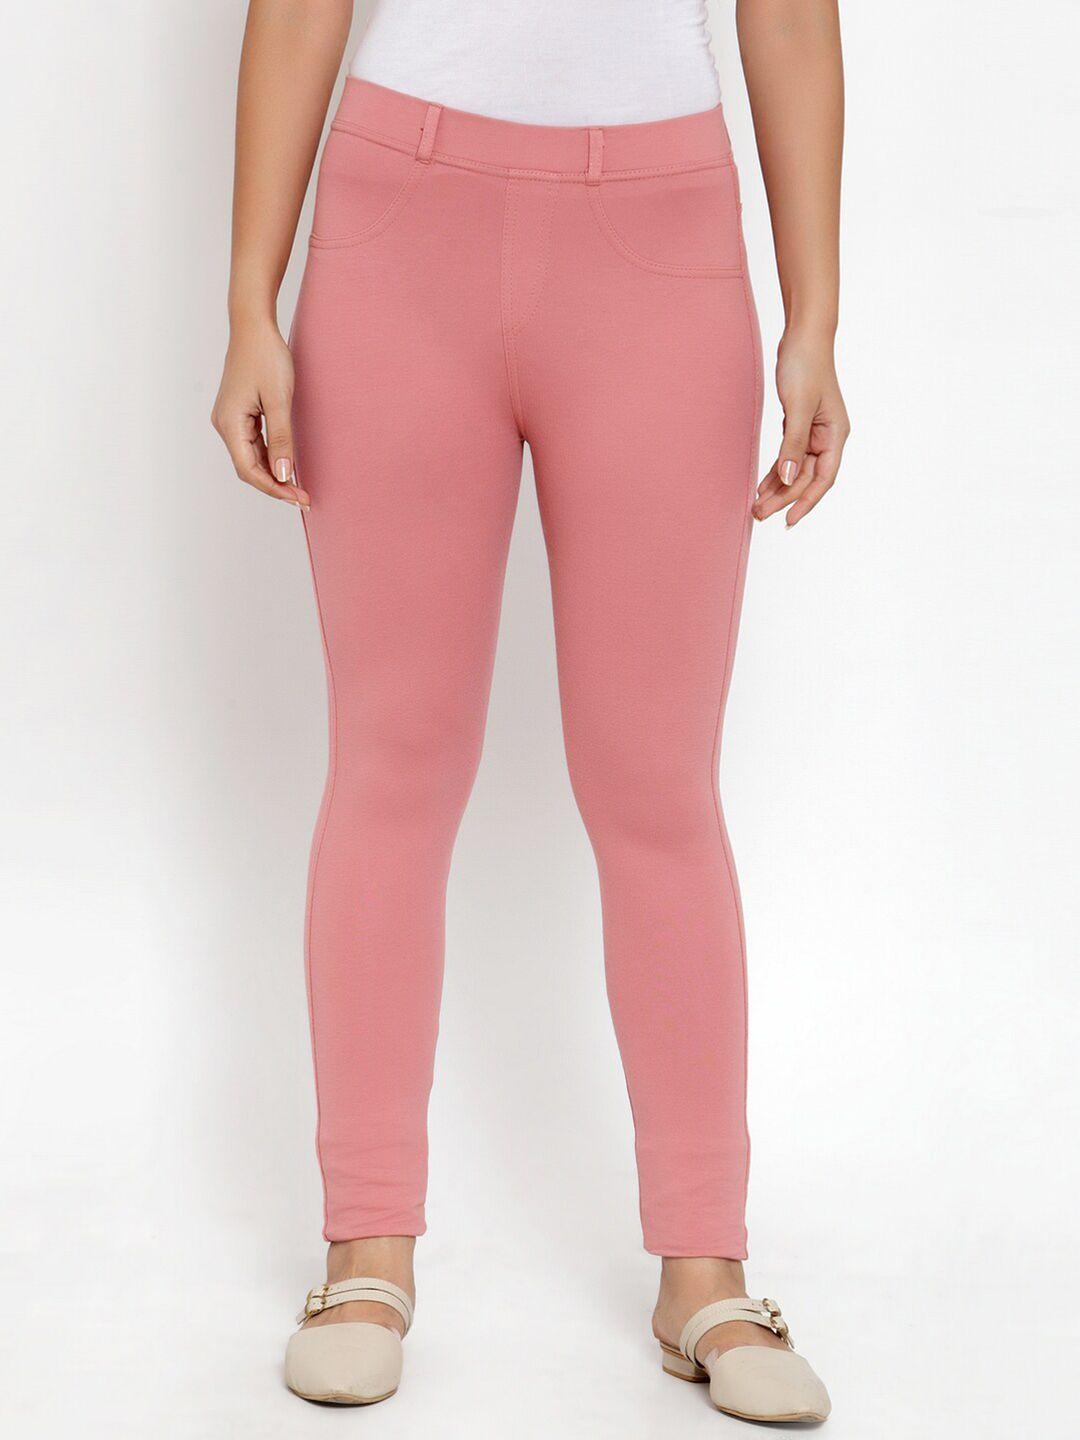 klotthe-women-peach-colored-solid-skinny-fit-jeggings